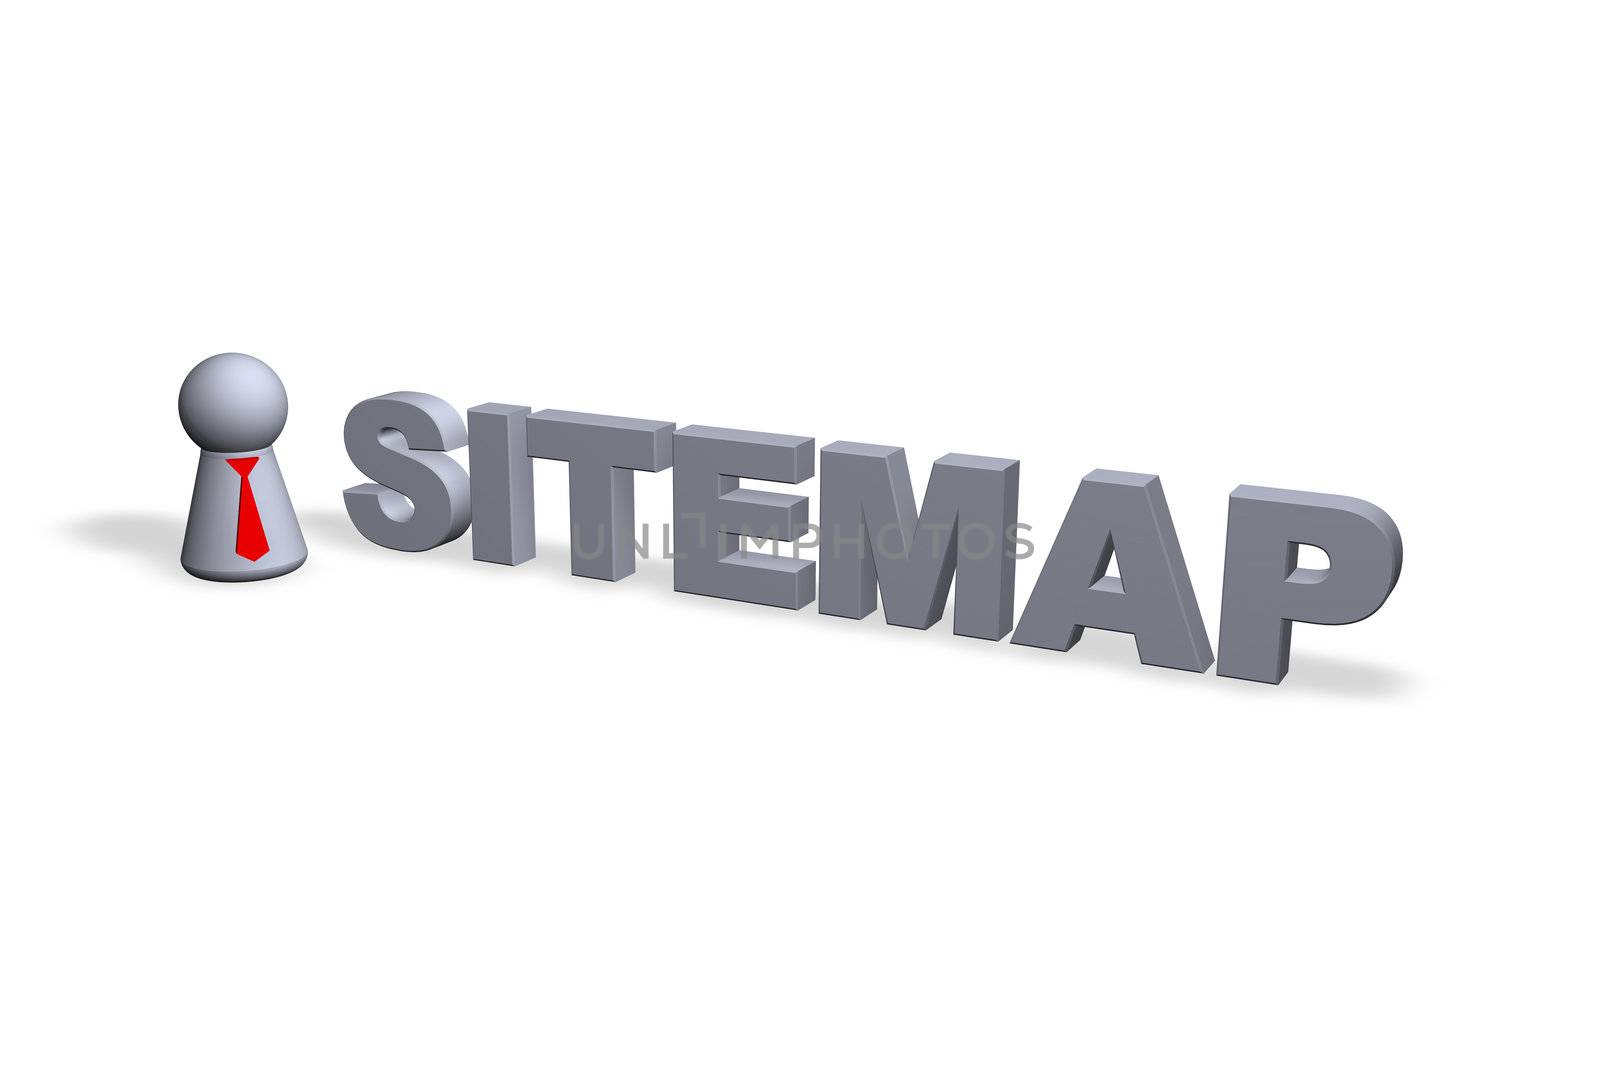 sitemap text in 3d and play figure with red tie